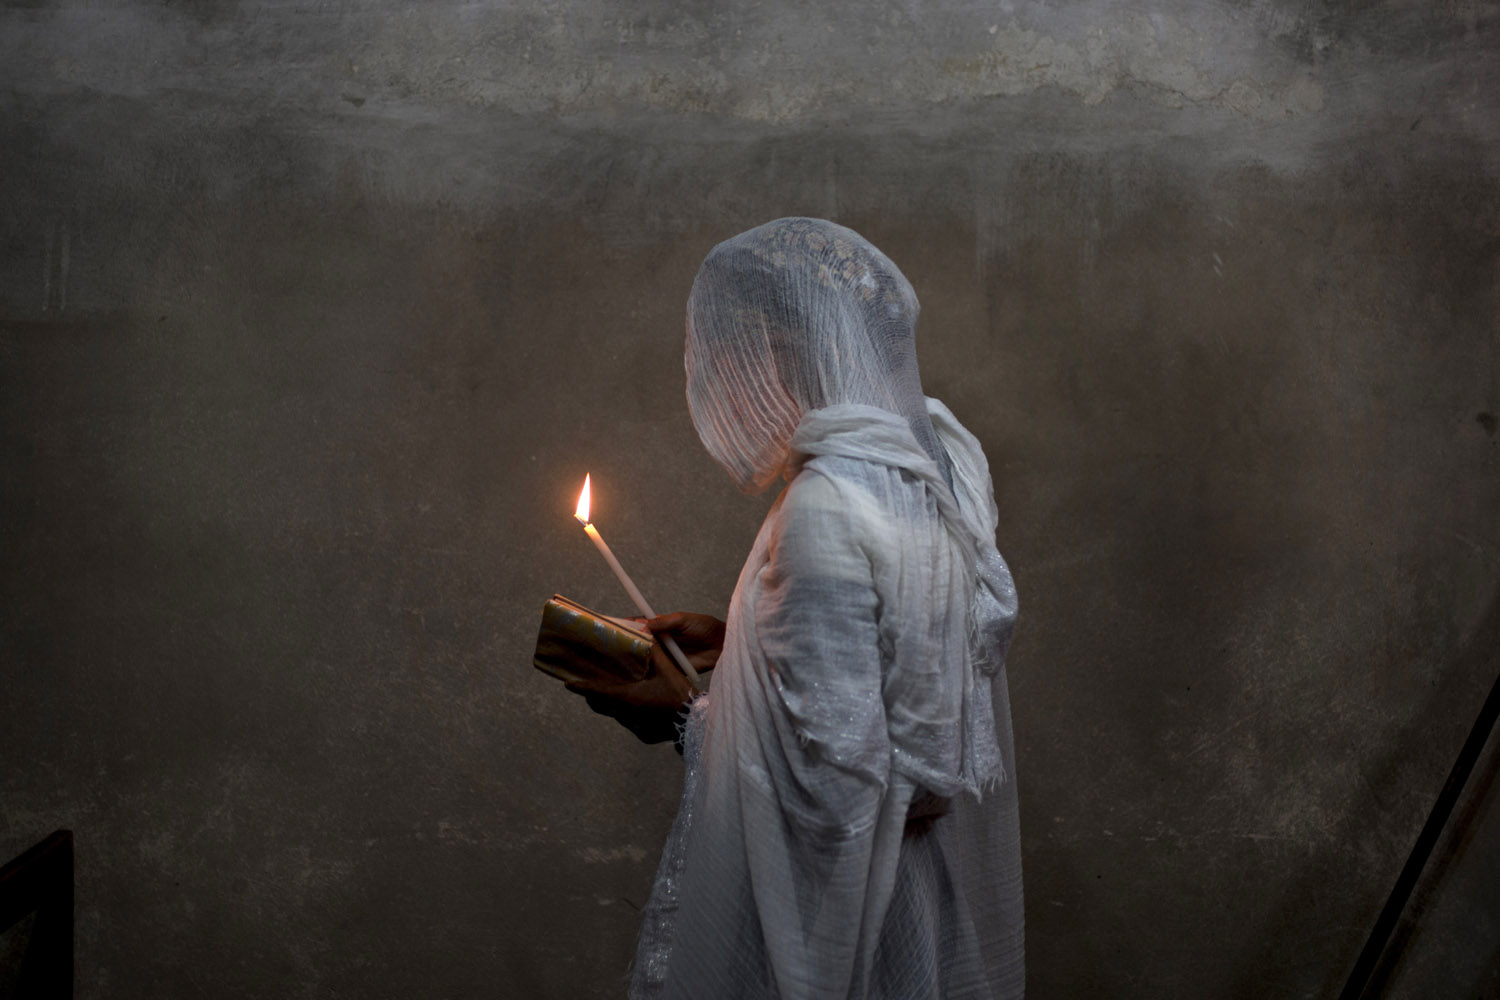 Image: Oct. 31, 2012. An Ethiopian Orthodox Christian woman prays at Deir El Sultan in the Church of the Holy Sepulchre, in Jerusalem's Old City.